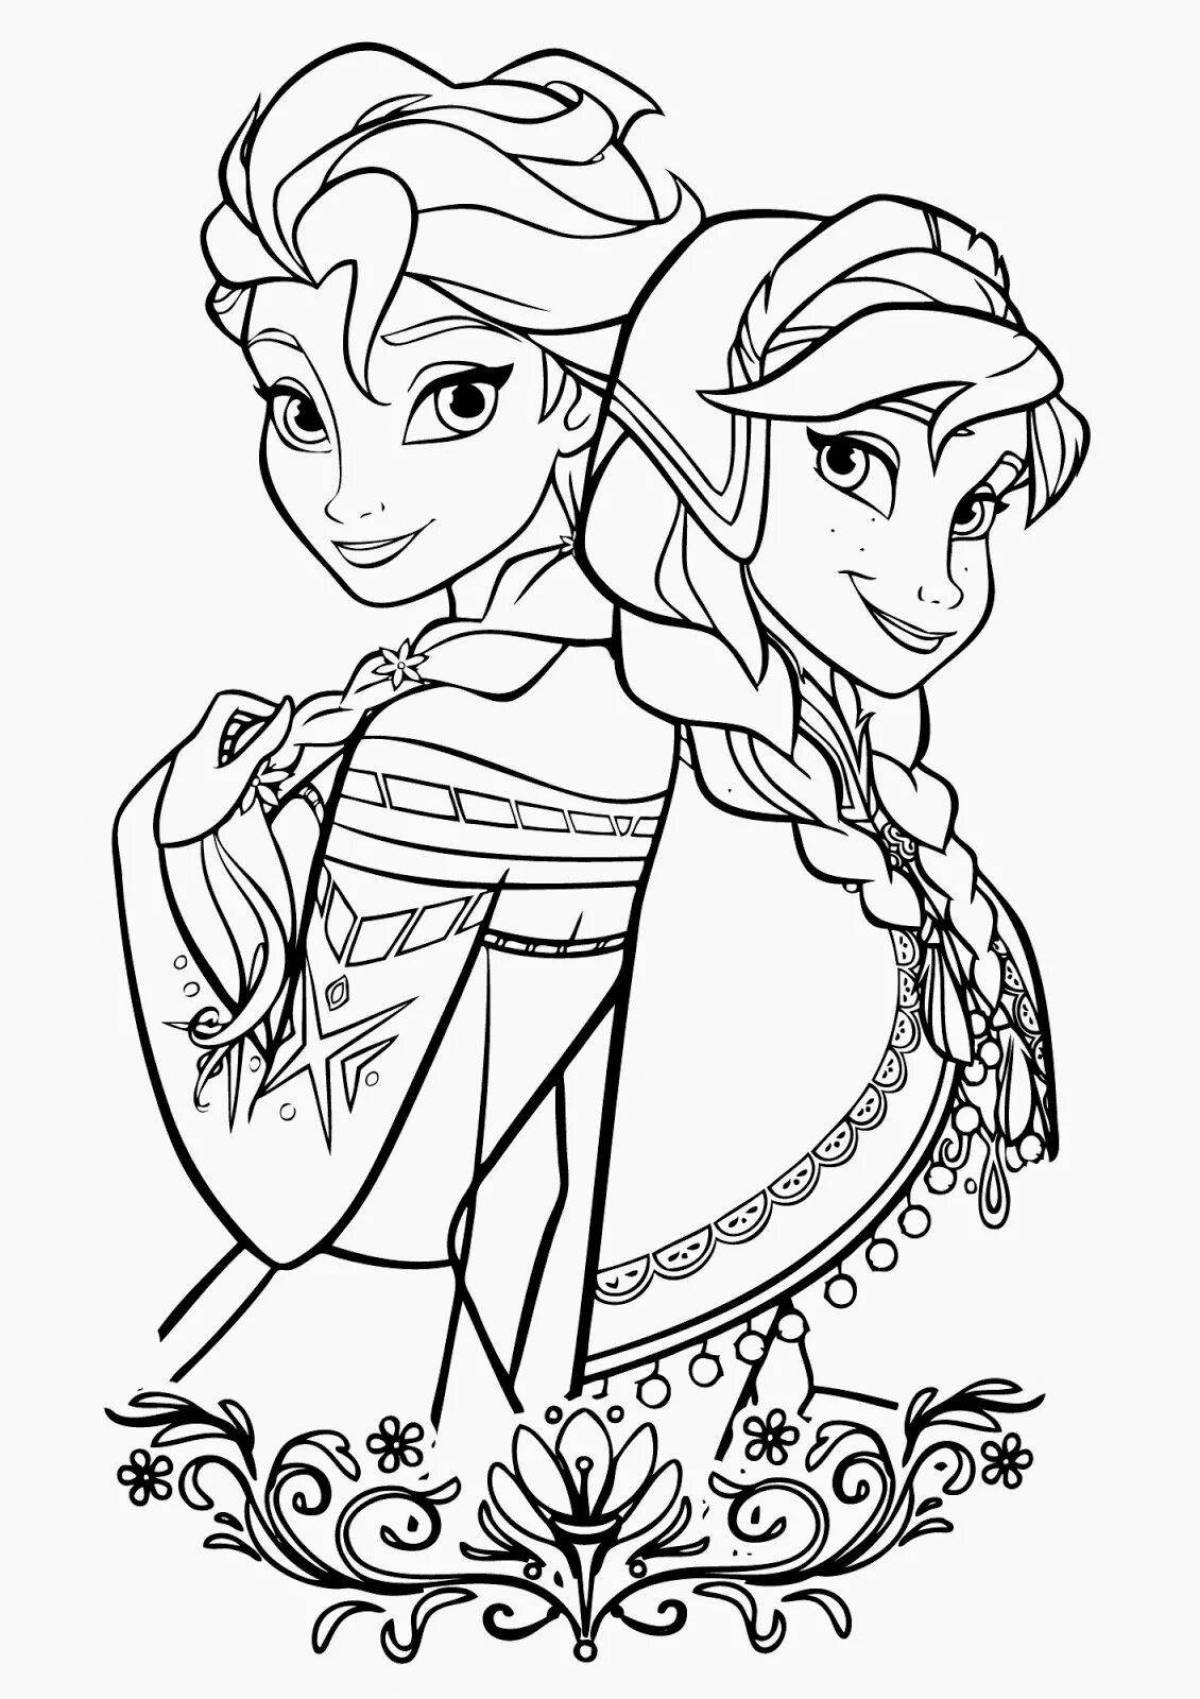 Dreamy elsa coloring book for girls